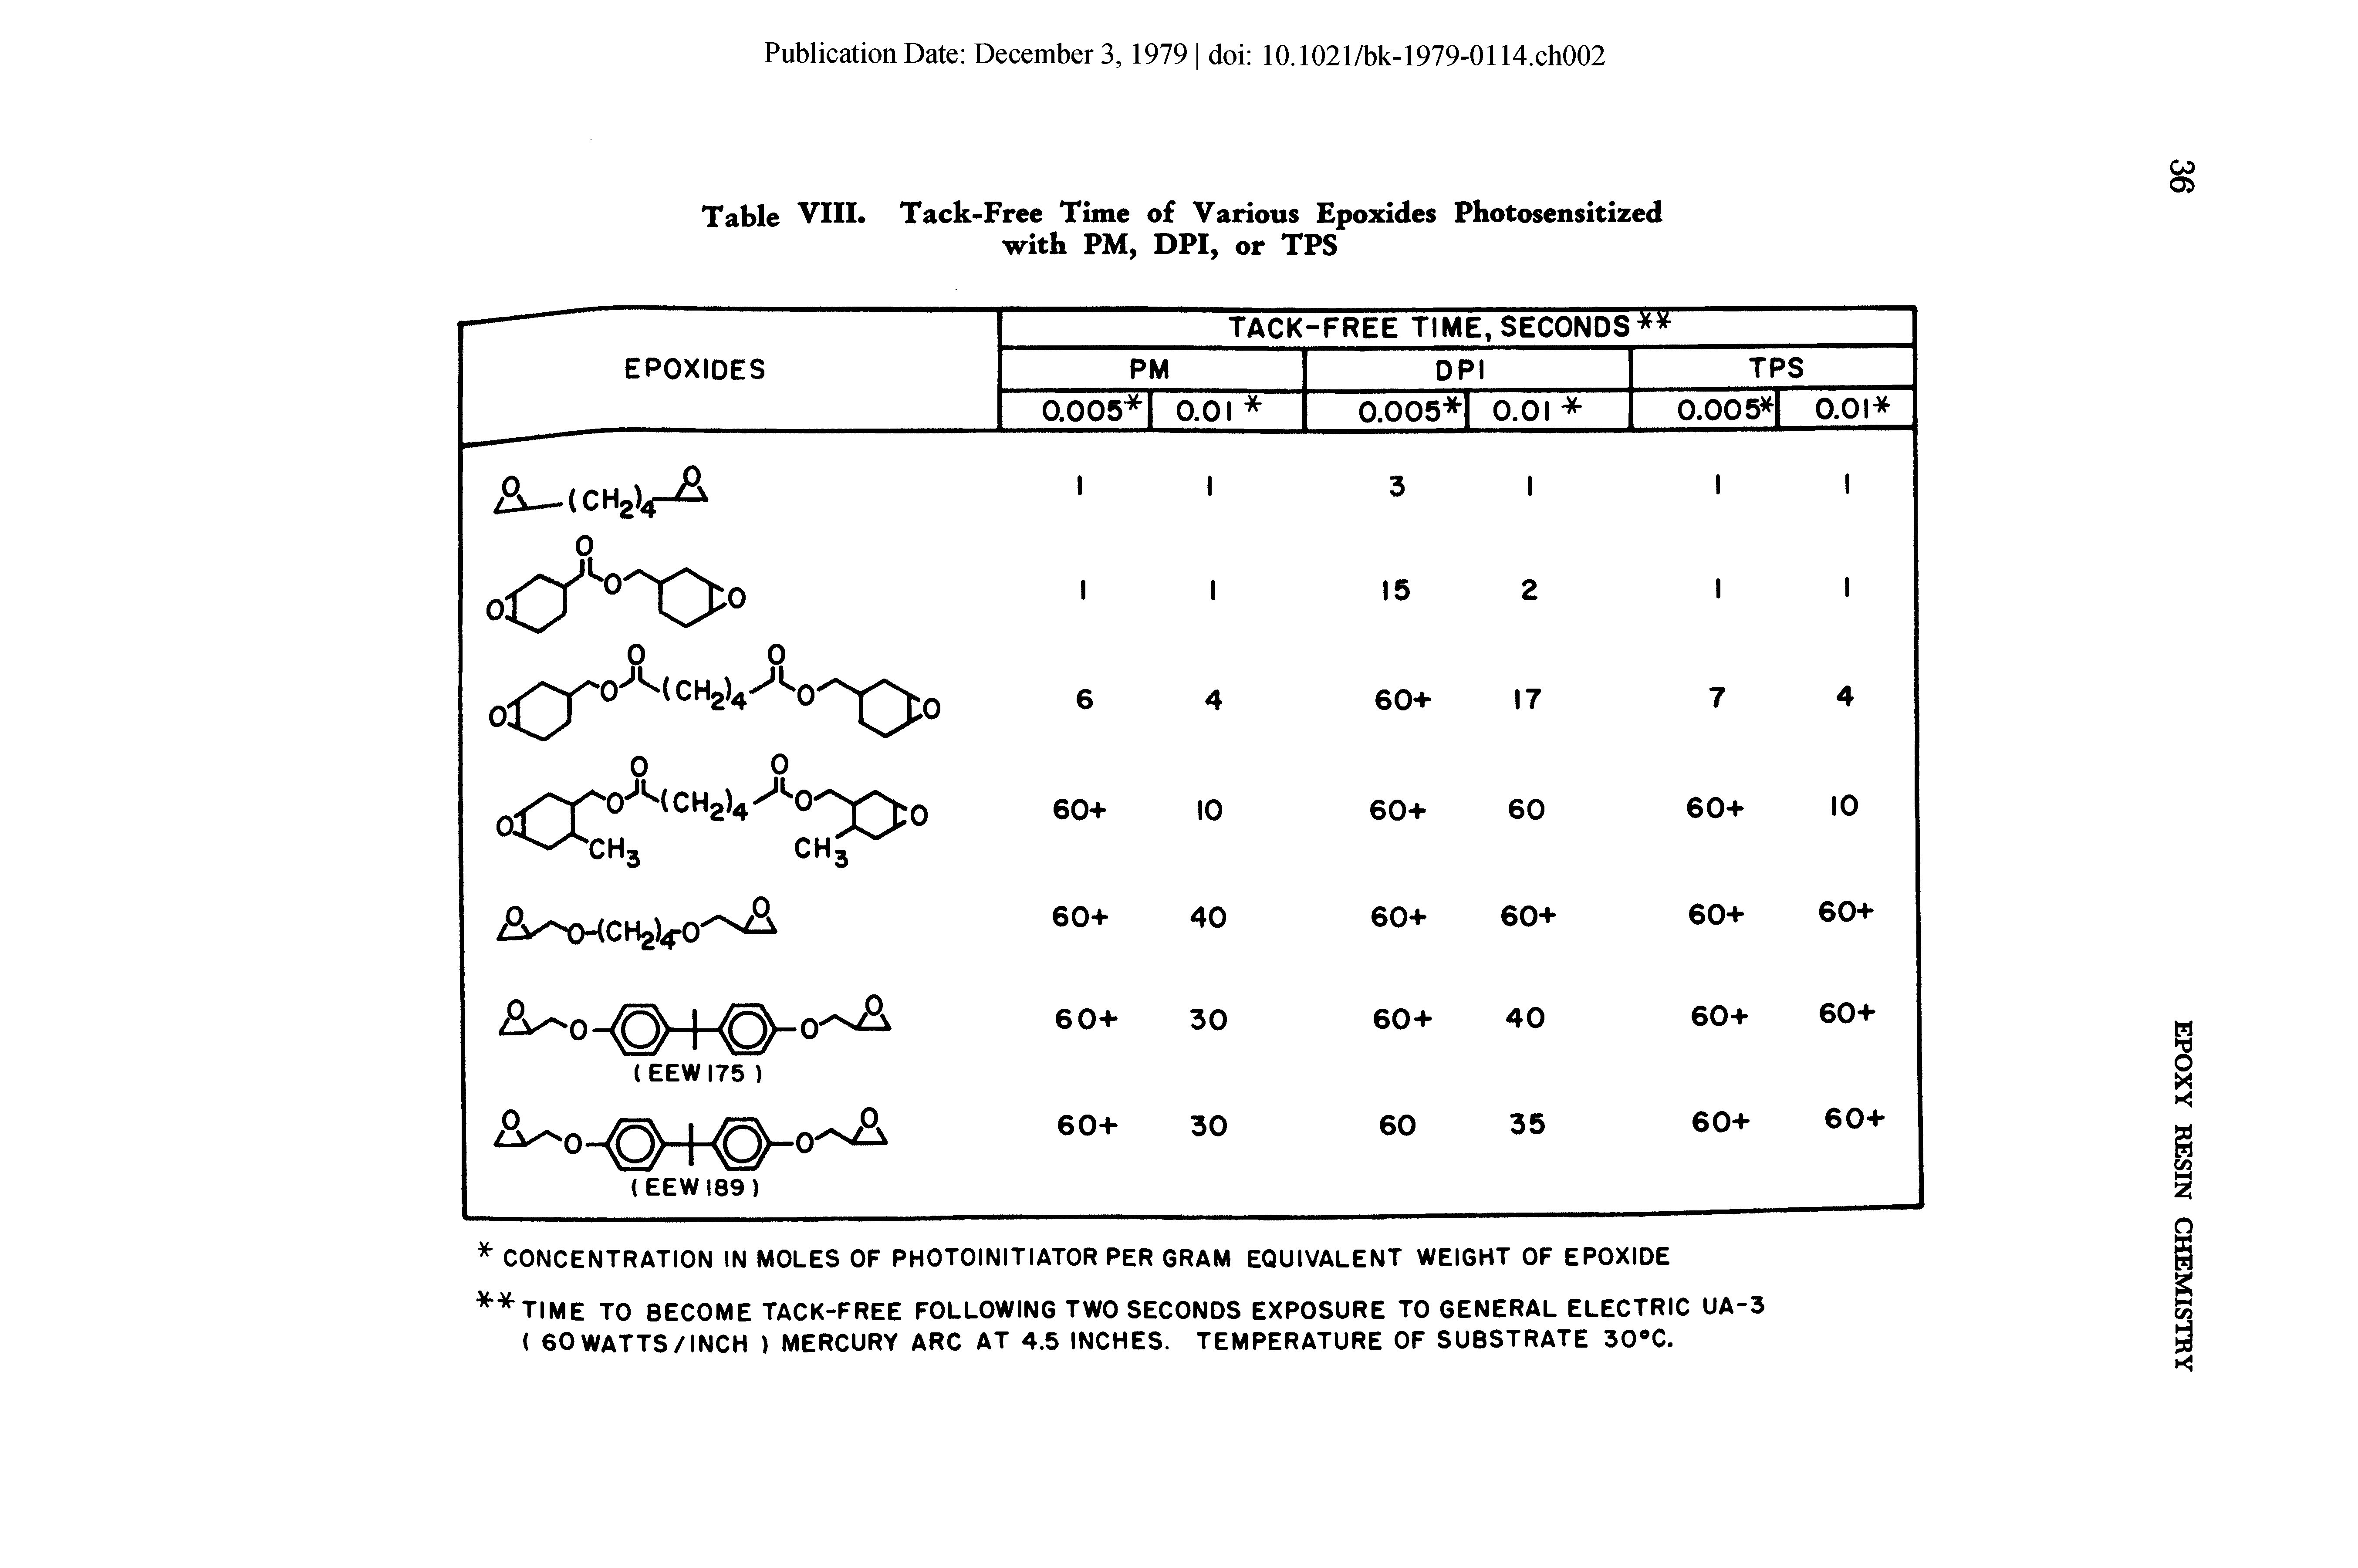 Table VIII. Tack-Free Time of Various Epoxides Photosensitized with PM, DPI, or TPS...